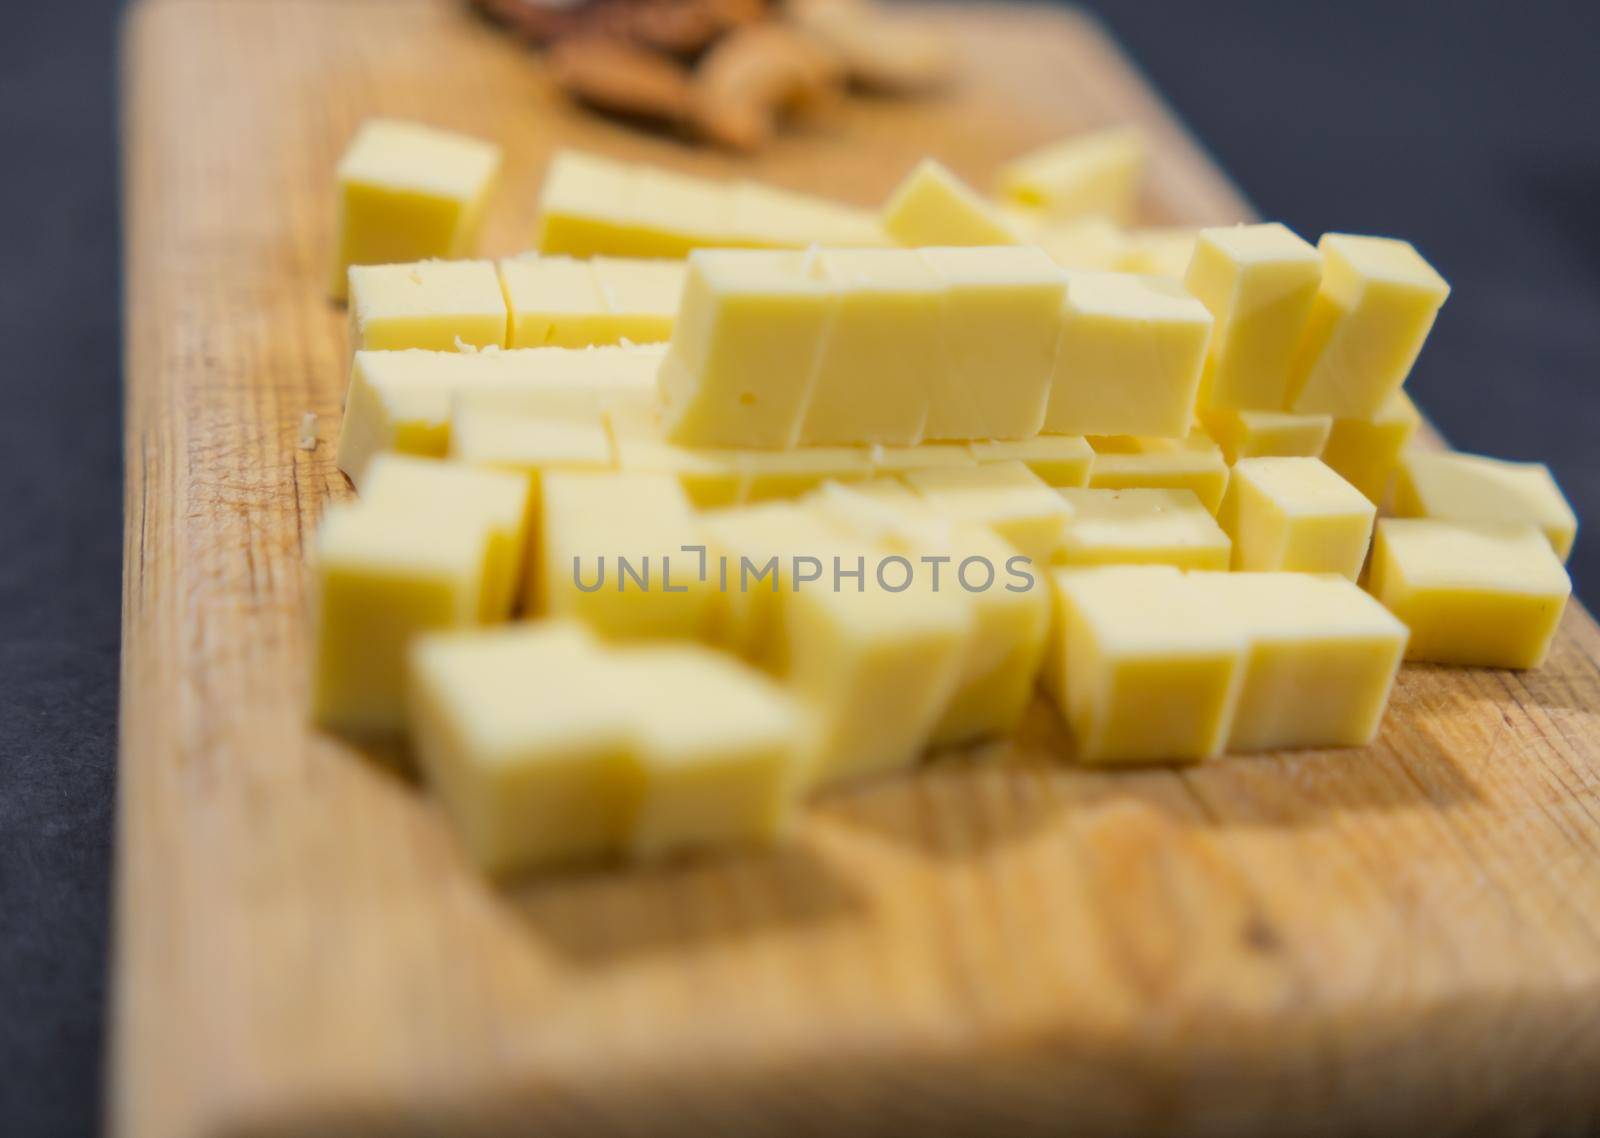 Close-up of diced yellow cheese and blurry walnuts on cutting board. Wooden board with fresh cheese cubes and nuts above black surface. Healthy snacks and balanced diet